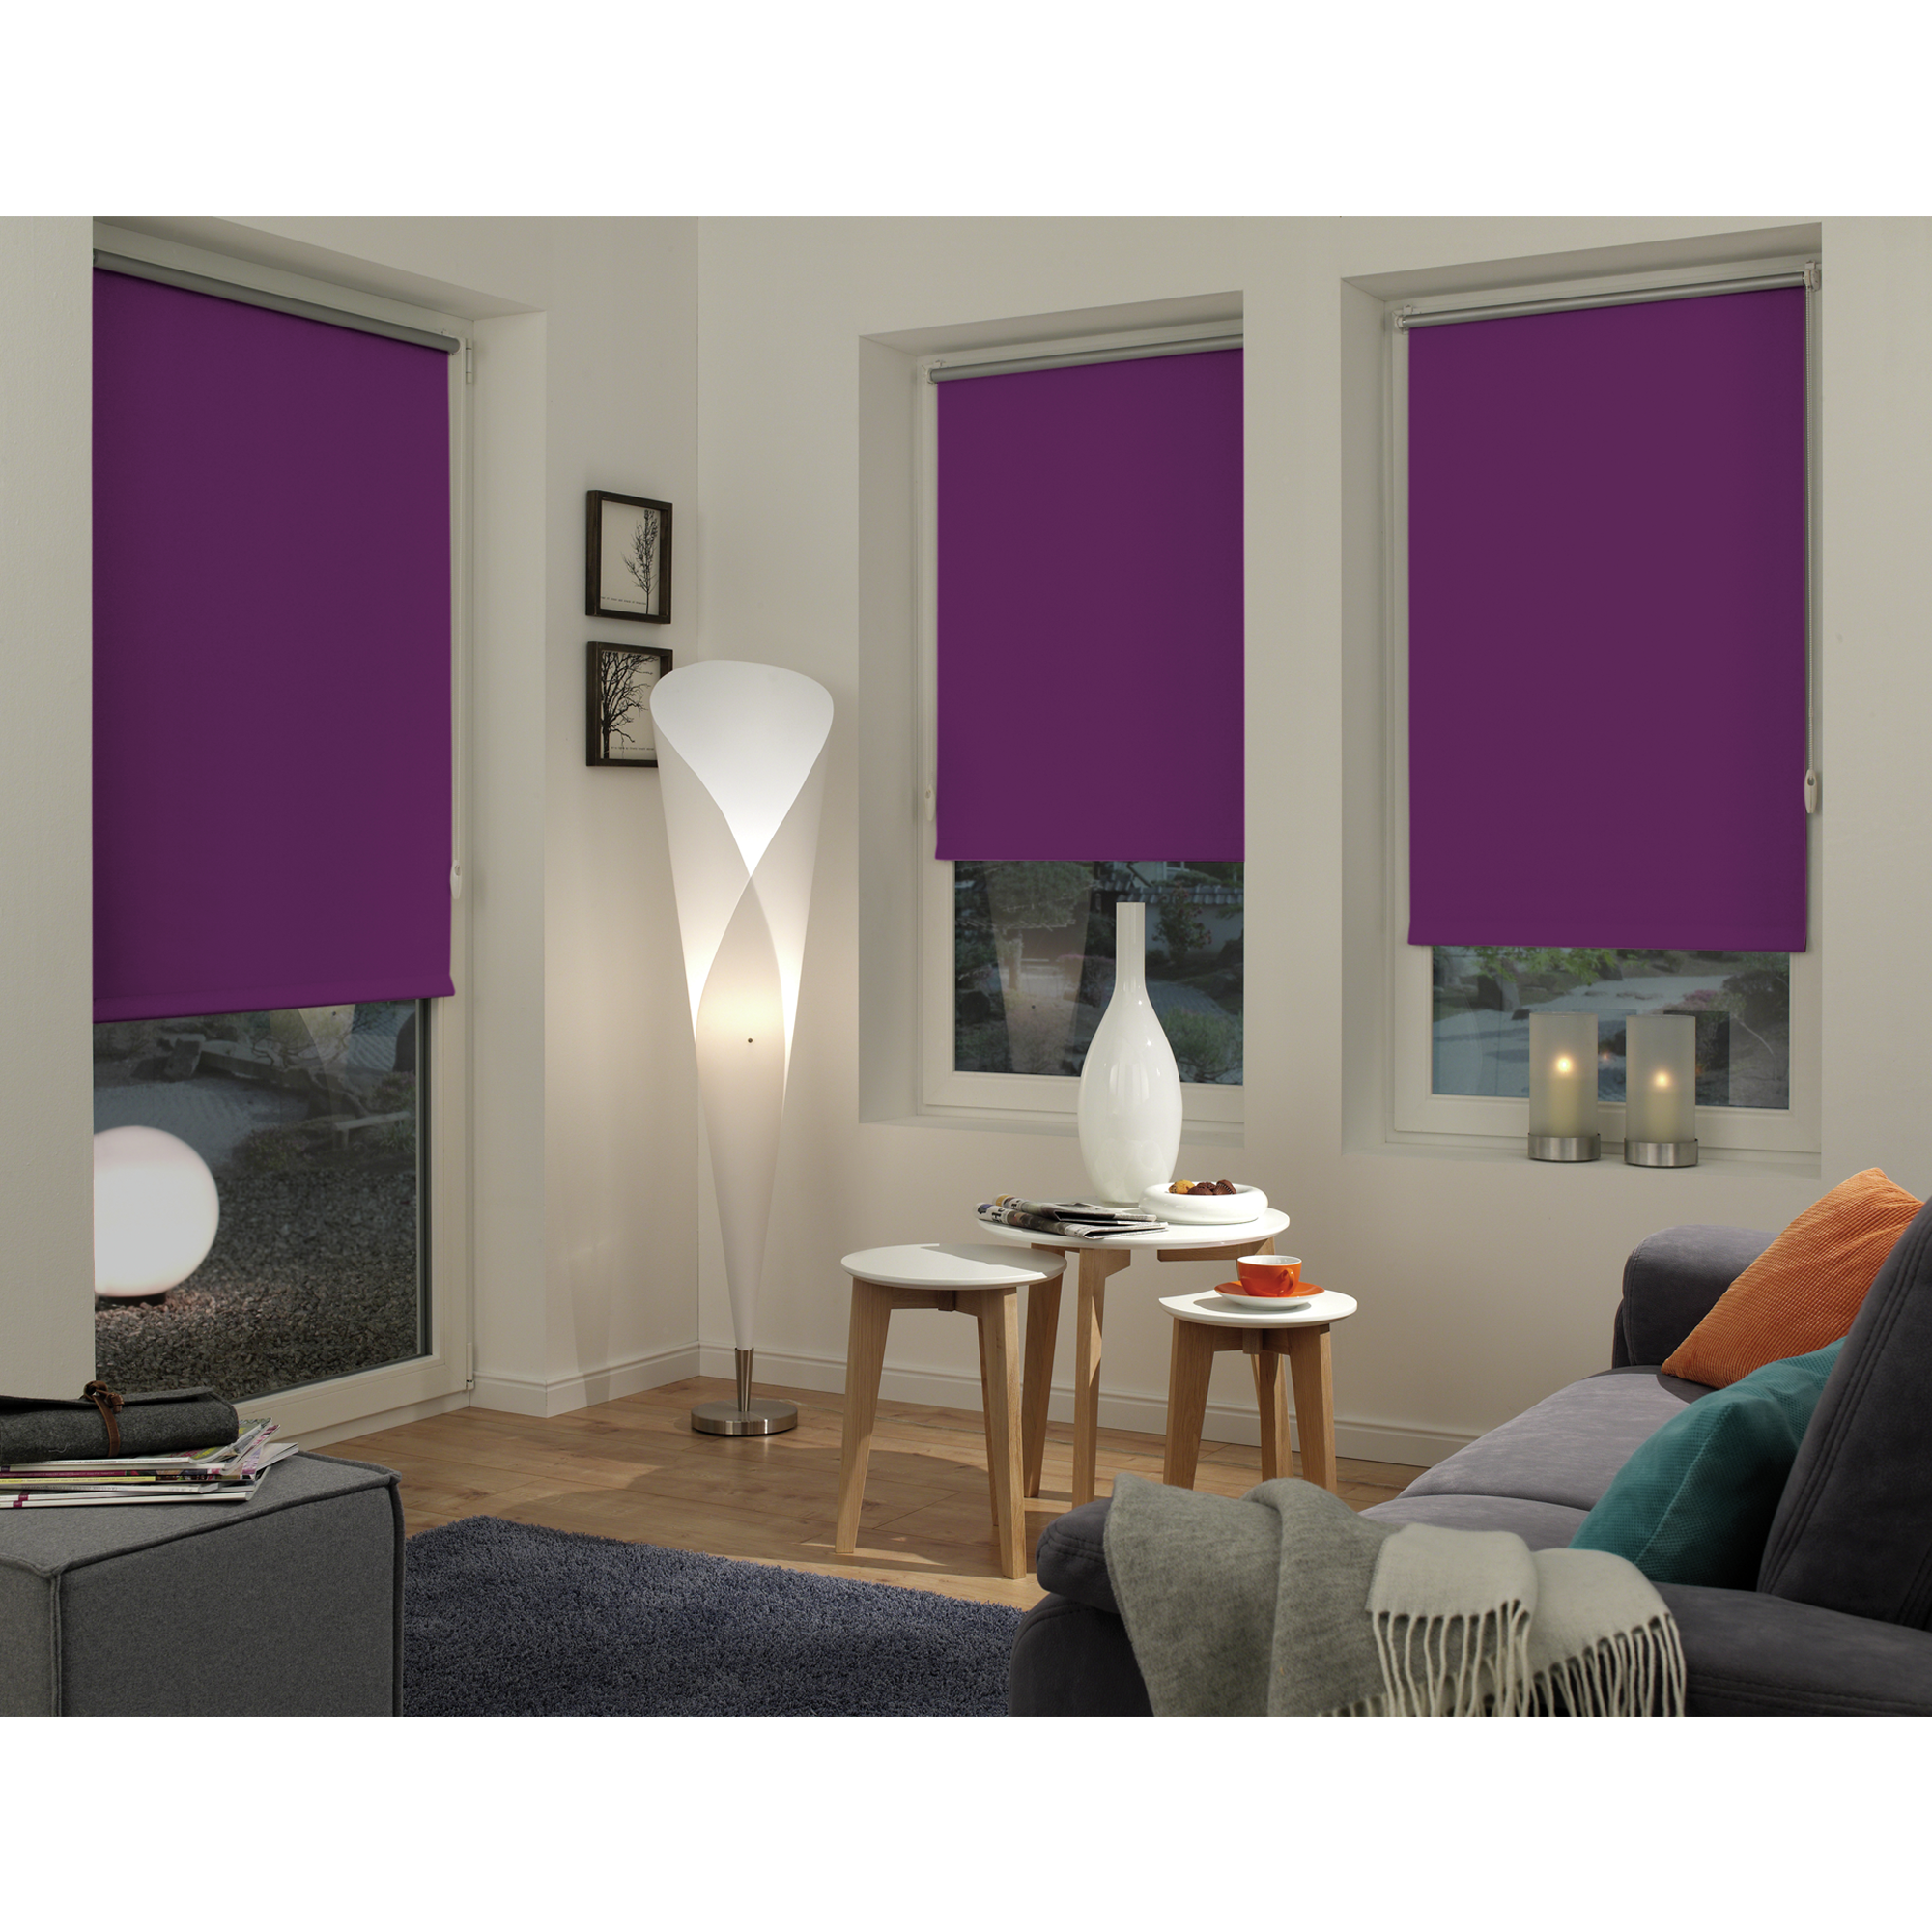 EasyFix Rollo 'Thermo energiesparend' lila 120 x 150 cm + product picture